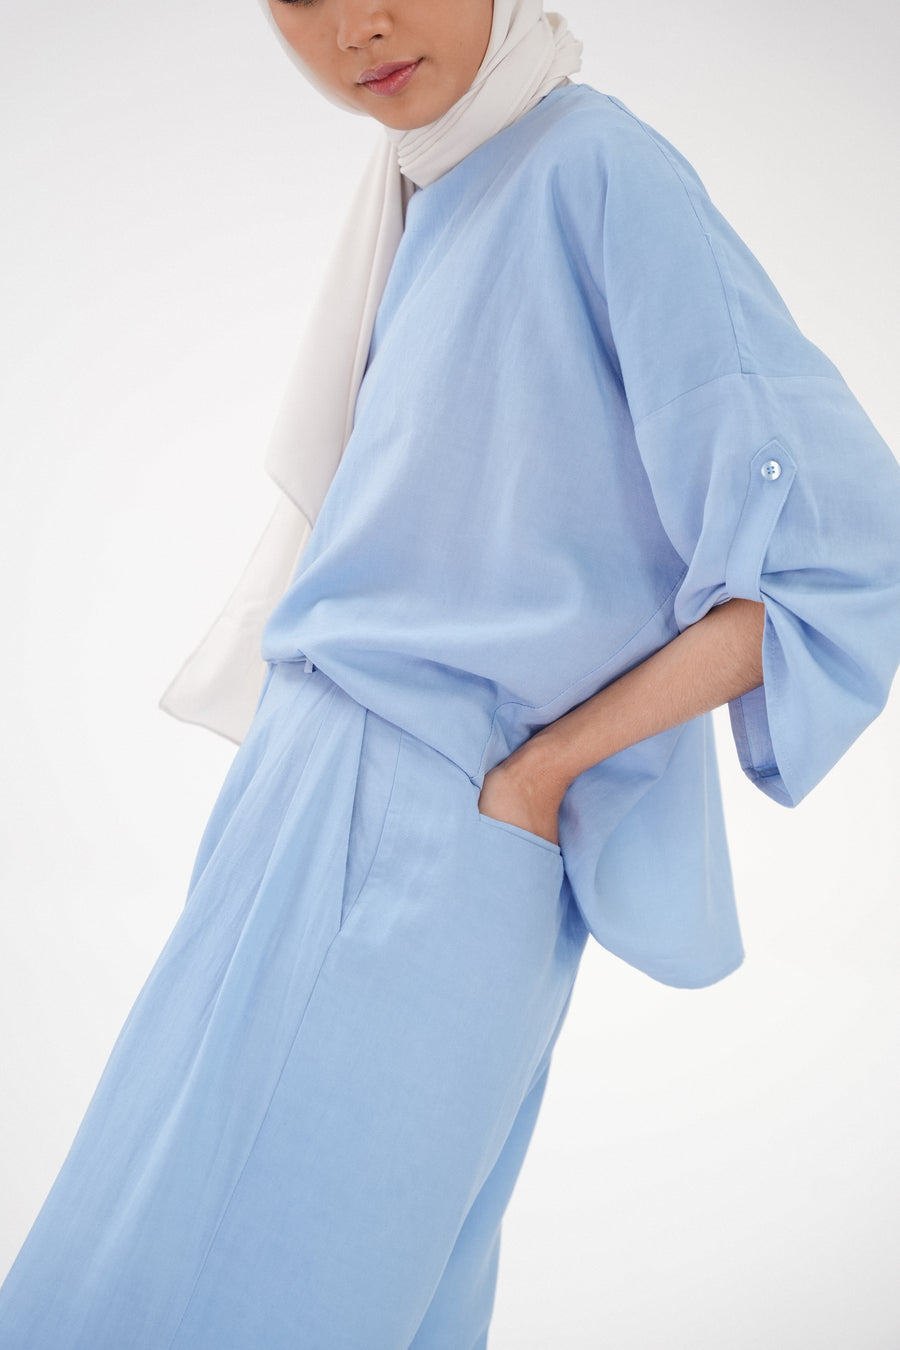 All-Rounder Blouse in Baby Blue